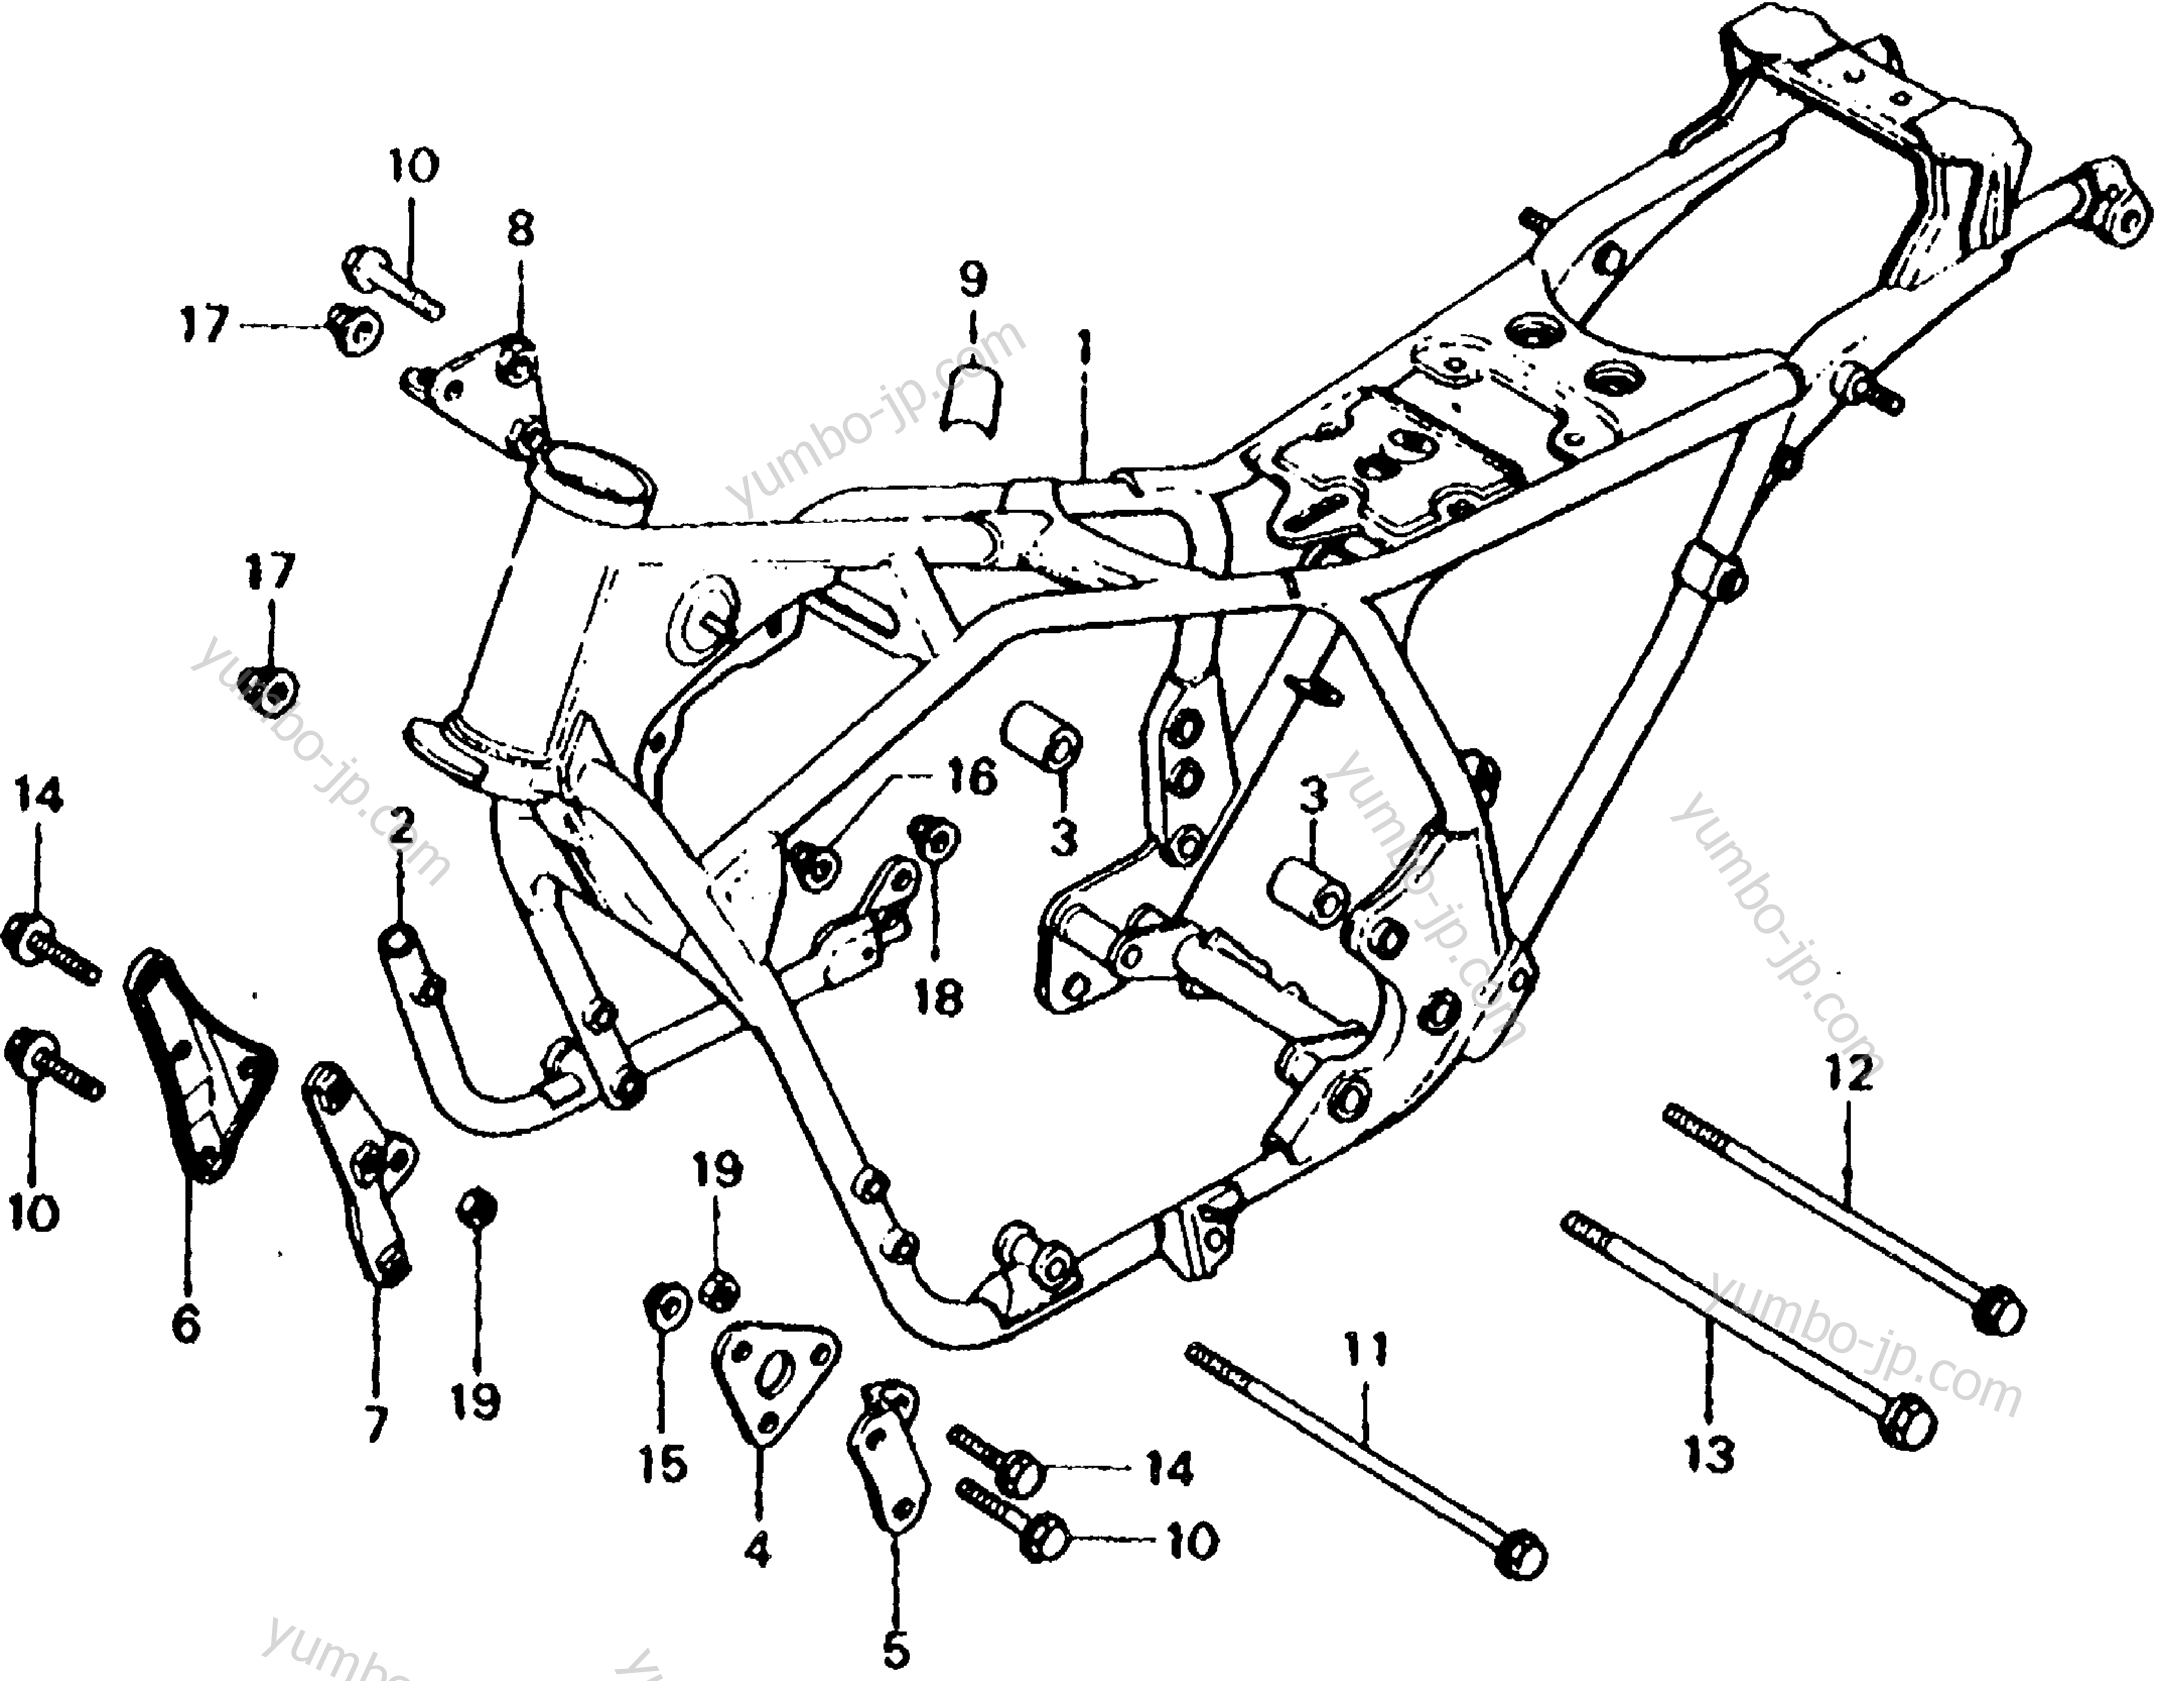 FRAME for motorcycles HONDA CB750F A 1981 year